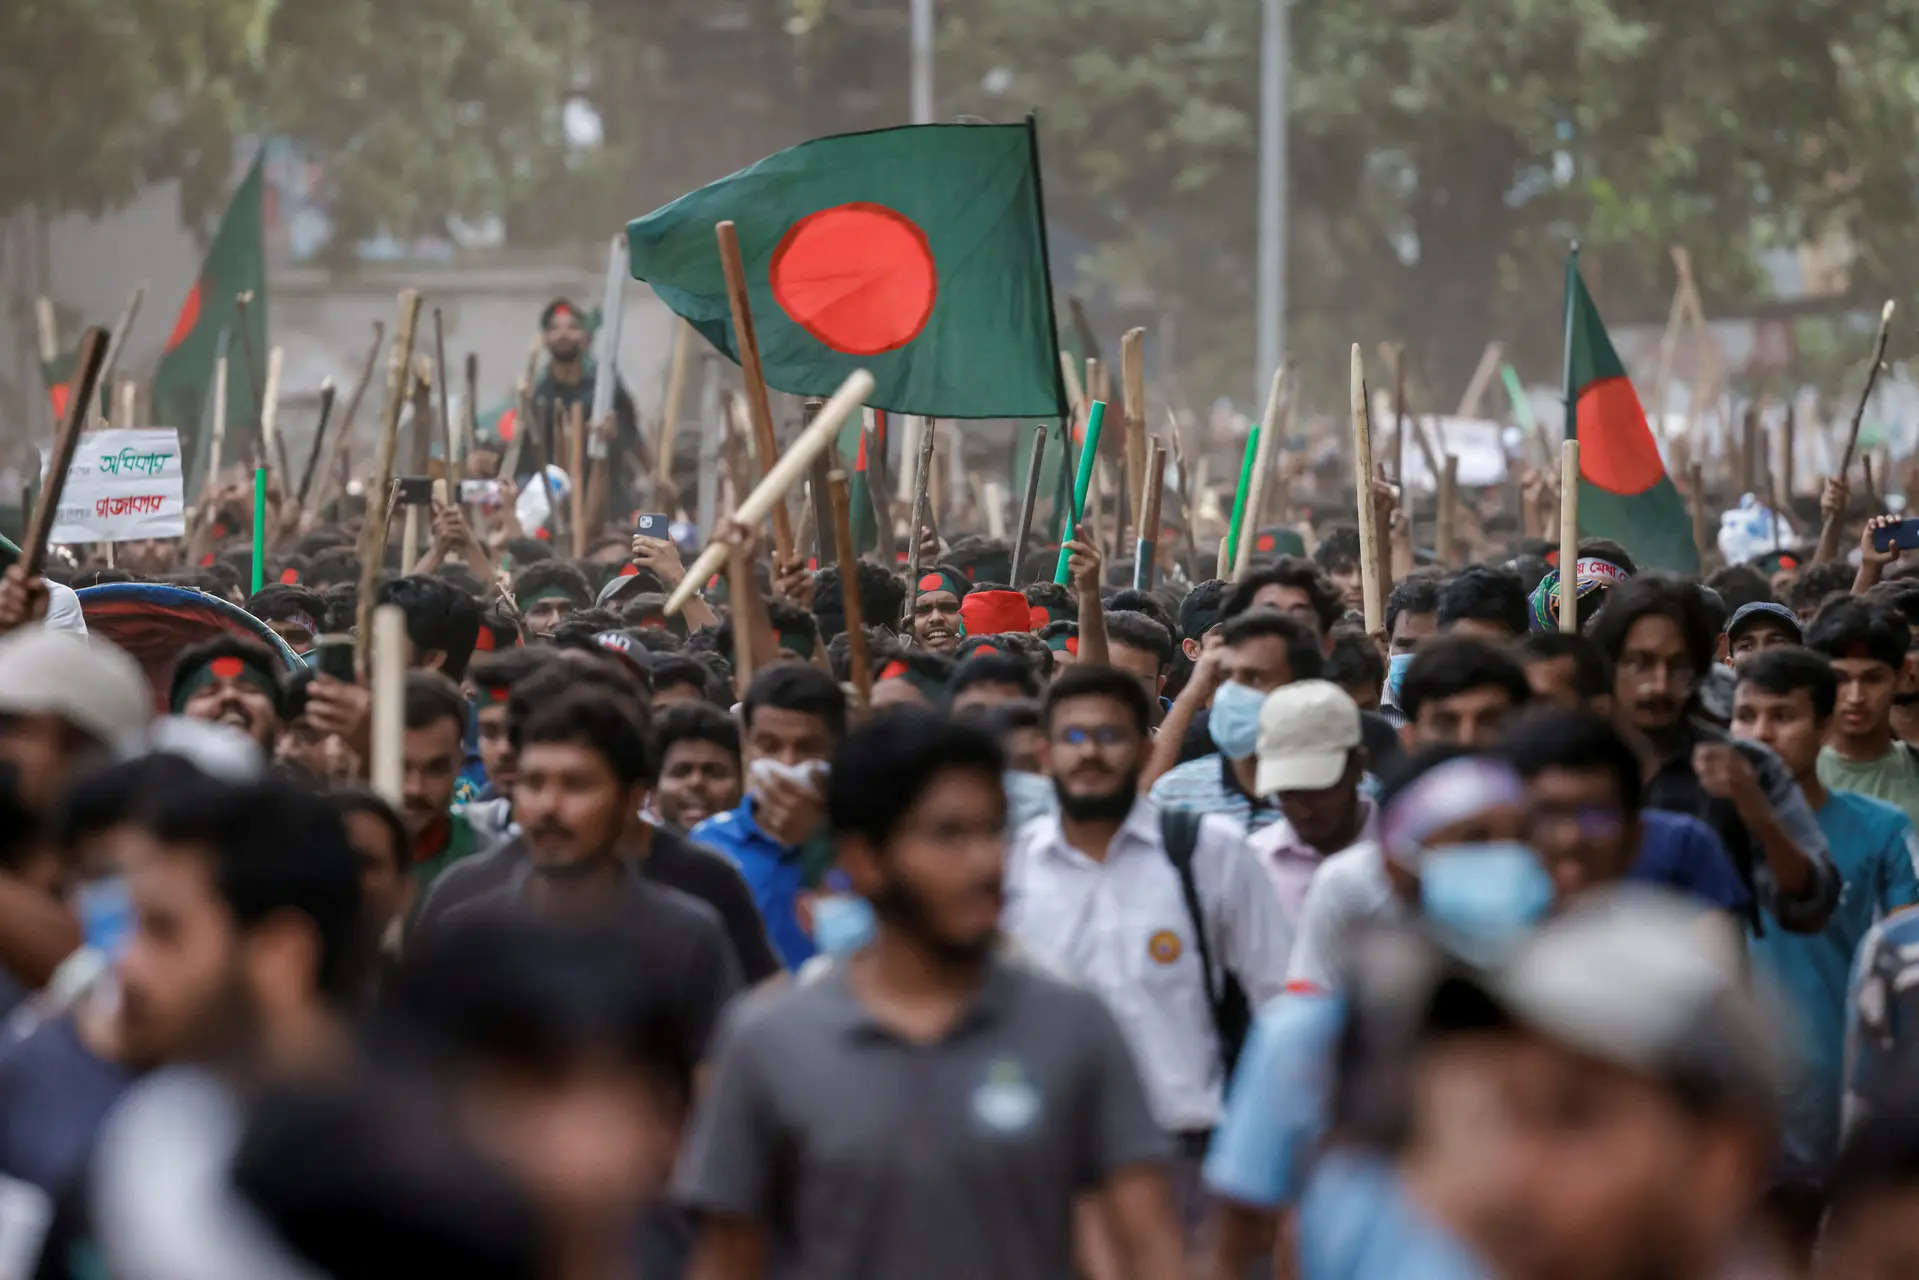 Nearly 100 killed, hundreds injured in clashes between protesters and ruling party supporters in Bangladesh 